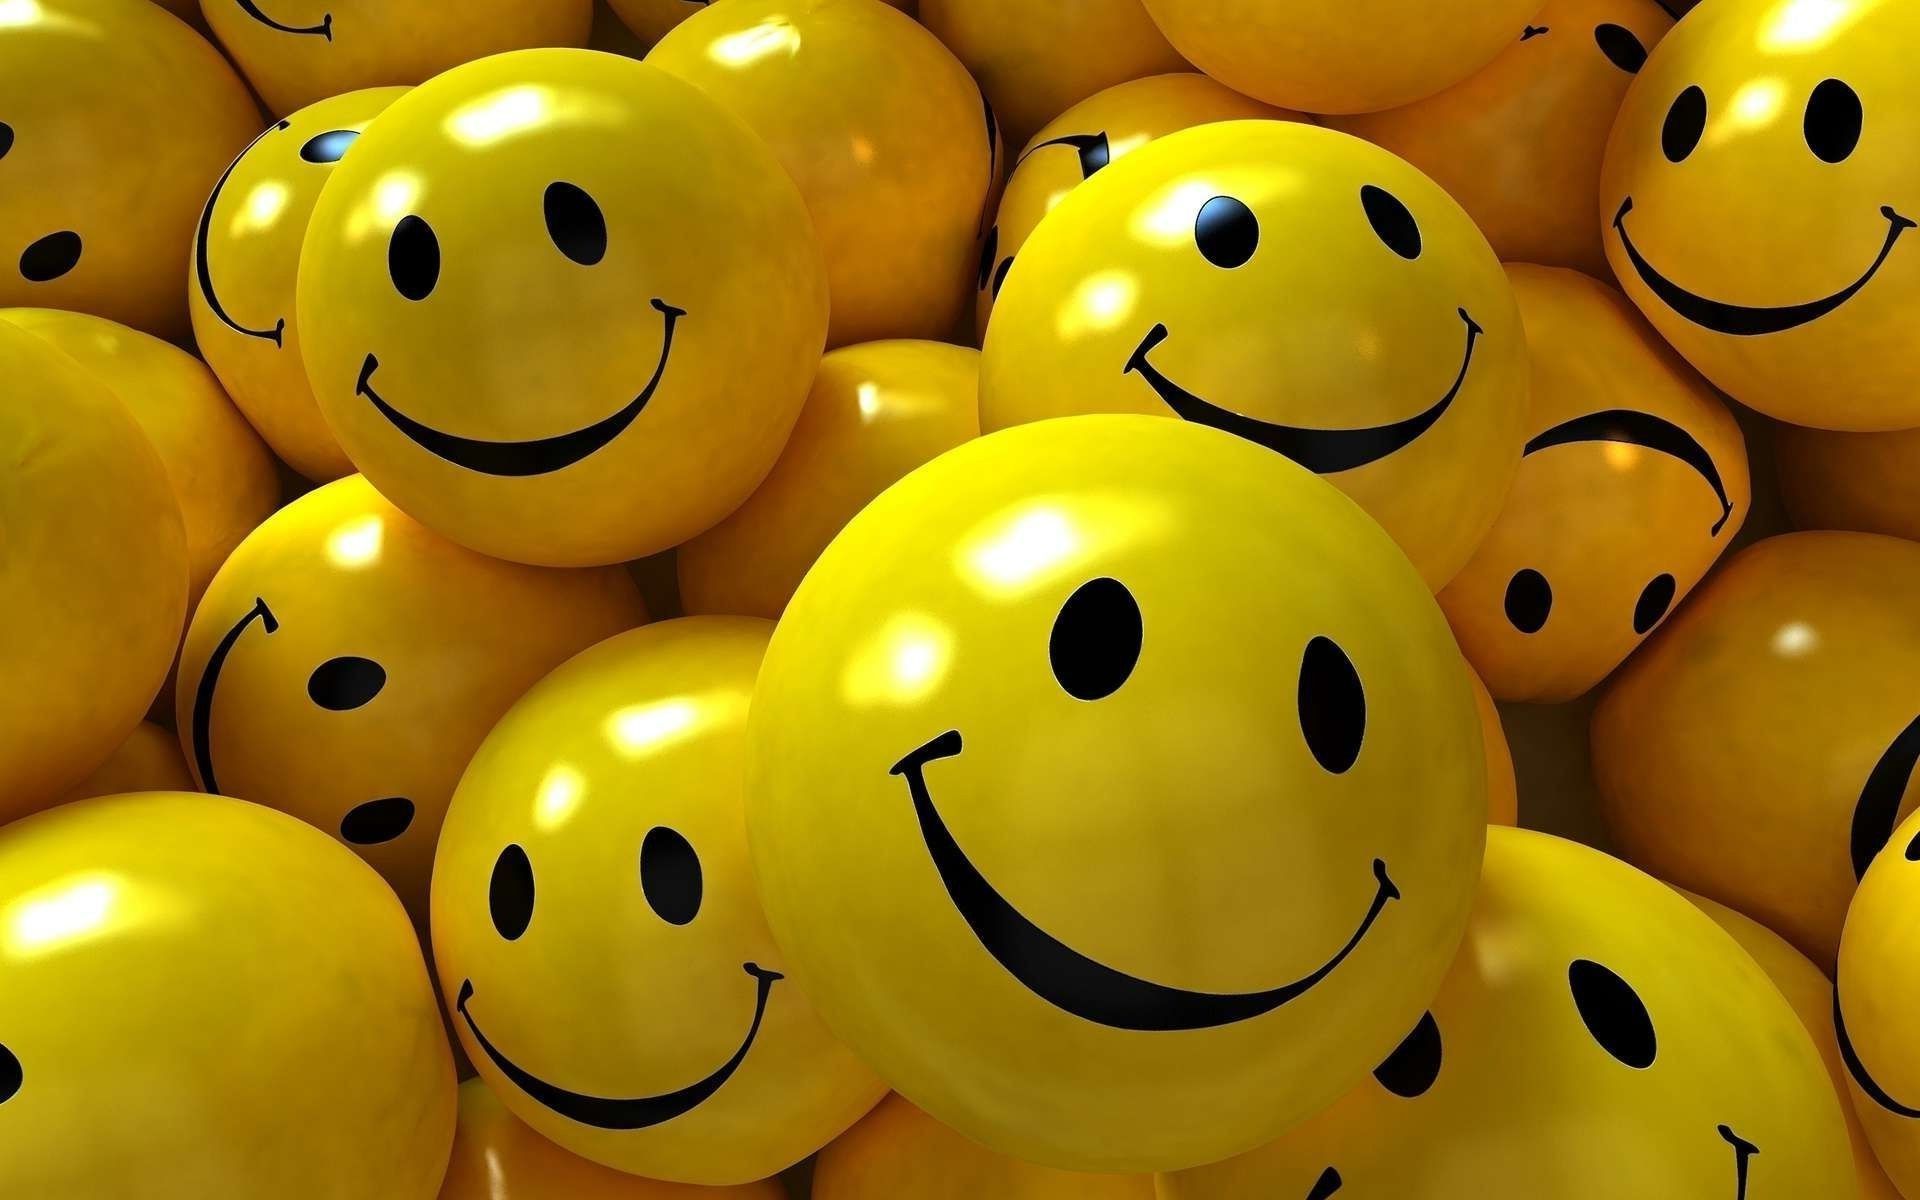 Smiley Face Wallpaper Free Smiley Face Background